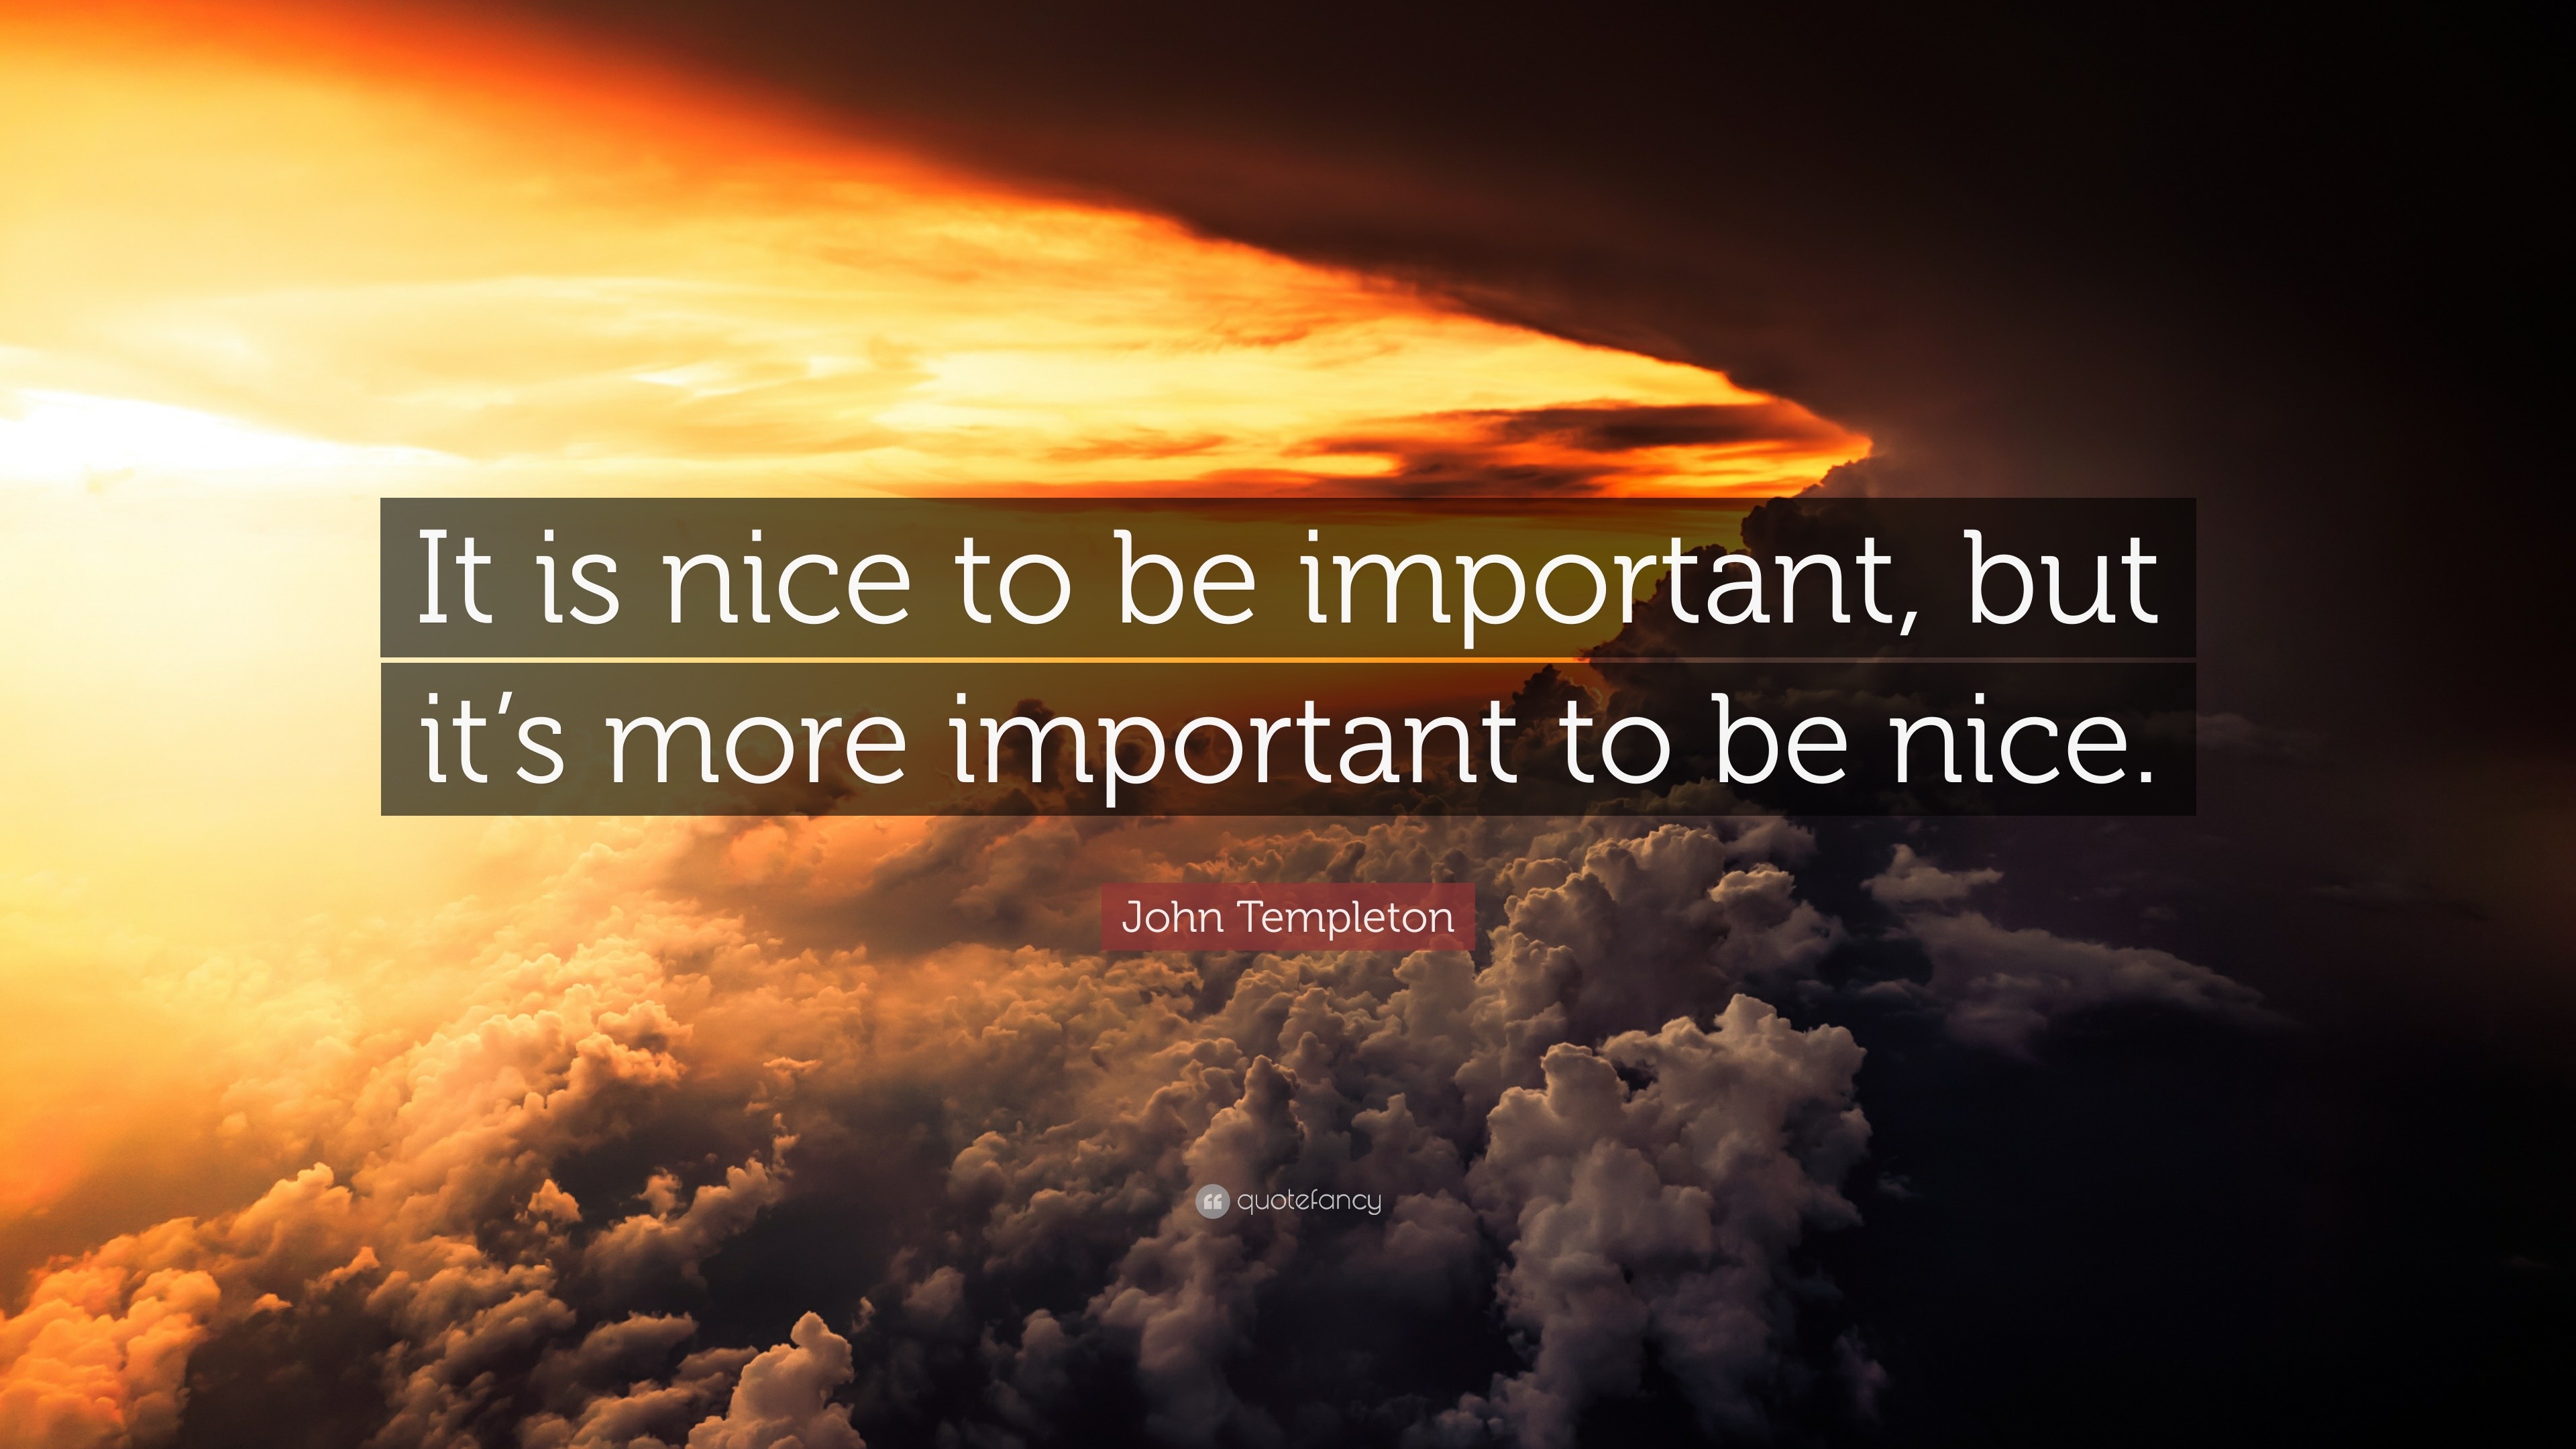 John Templeton Quote “It is nice to be important, but it